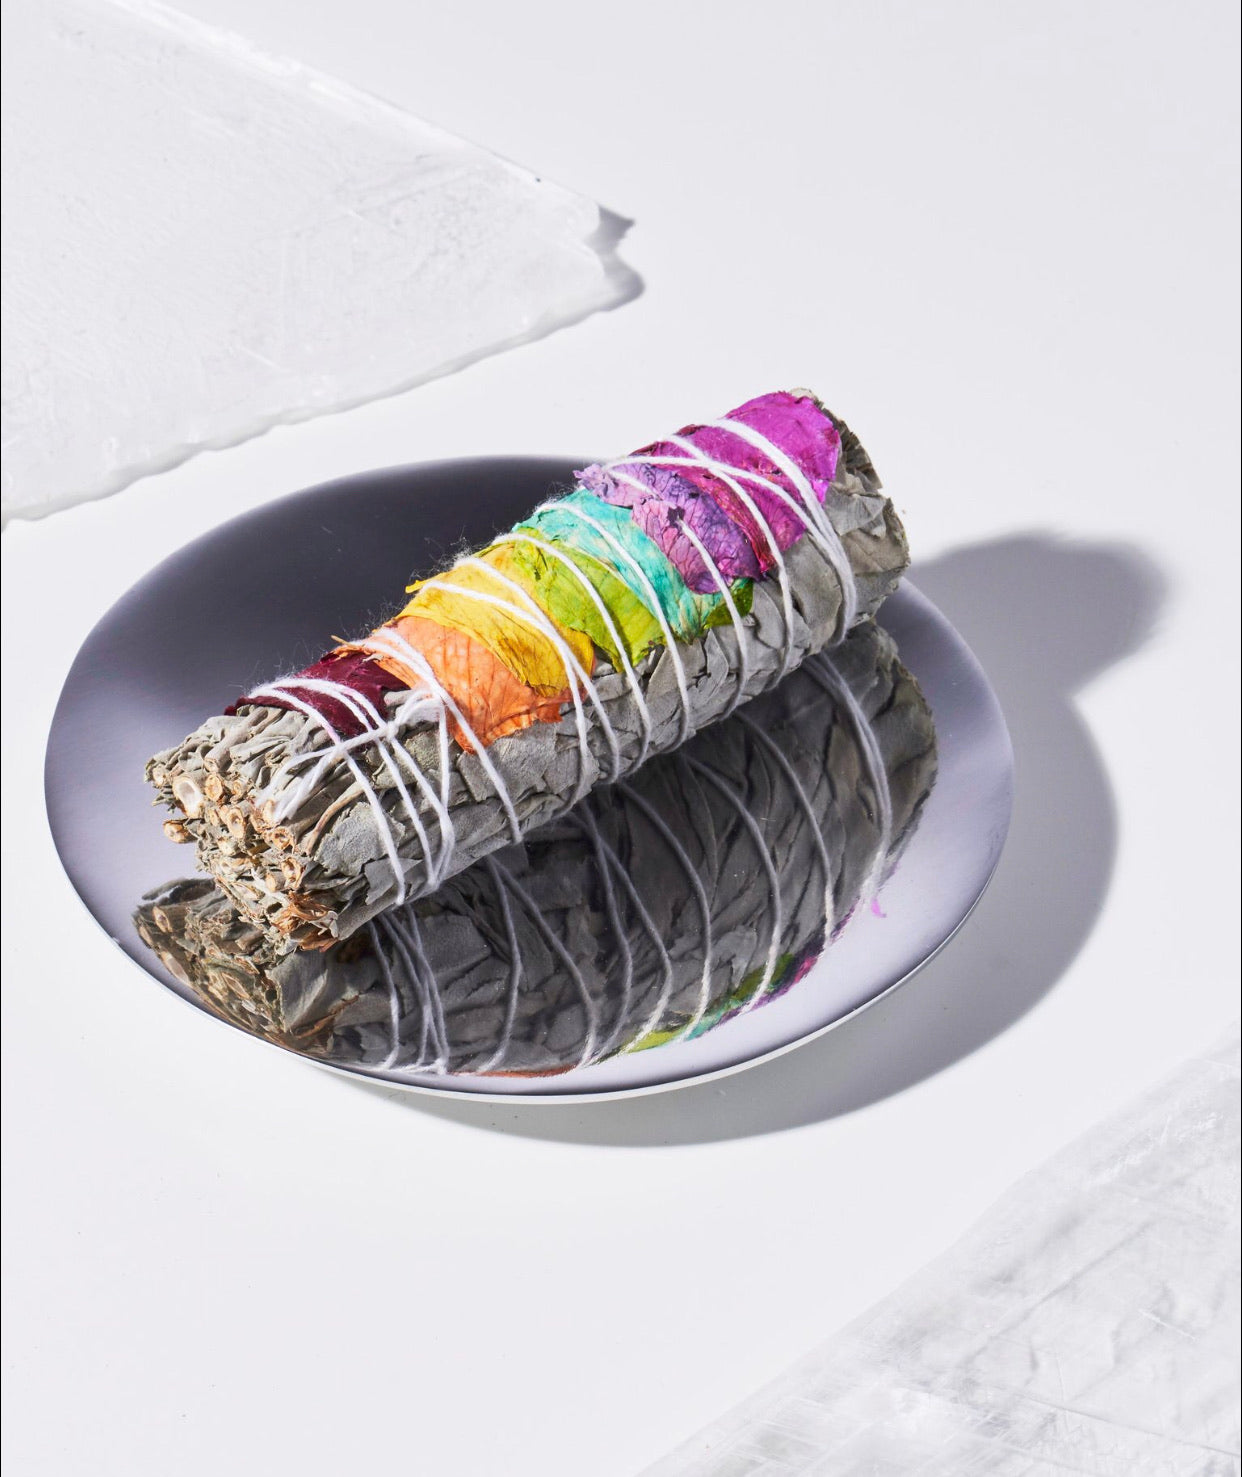 Chakra Balancing Sage and Rose Smudge Bundle - Root to Crown Energy Alignment: Align your chakras with sage and rose petals corresponding to each chakra color. Use this sacred smoke bundle for energy clearing and creative empowerment.